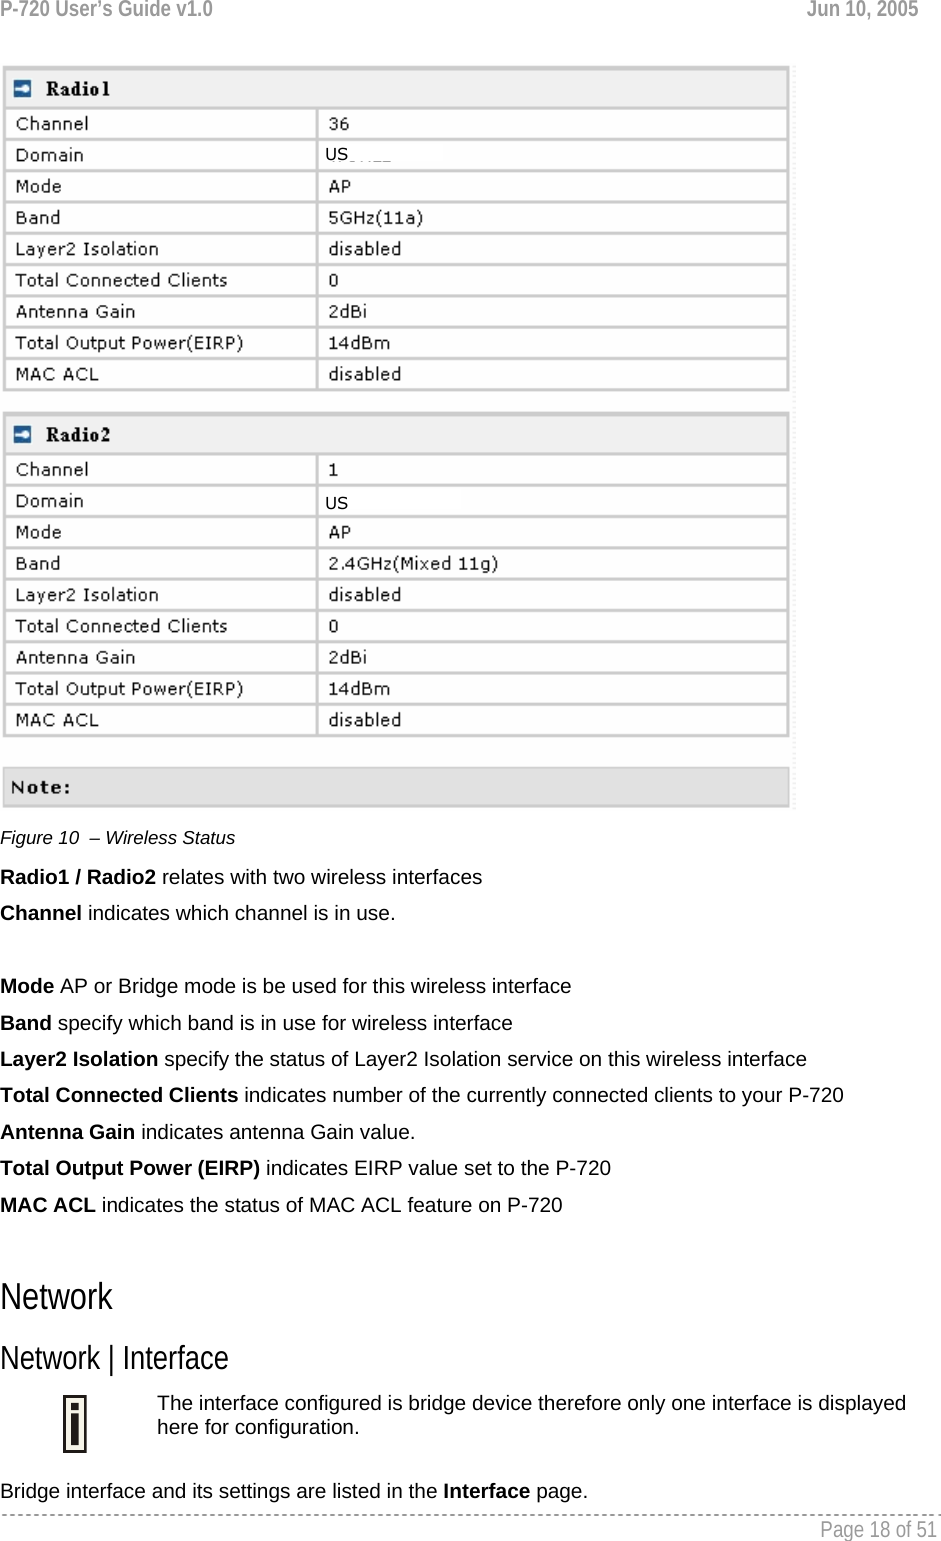 P-720 User’s Guide v1.0  Jun 10, 2005     Page 18 of 51    Figure 10  – Wireless Status Radio1 / Radio2 relates with two wireless interfaces Channel indicates which channel is in use. Mode AP or Bridge mode is be used for this wireless interface Band specify which band is in use for wireless interface Layer2 Isolation specify the status of Layer2 Isolation service on this wireless interface Total Connected Clients indicates number of the currently connected clients to your P-720 Antenna Gain indicates antenna Gain value.  Total Output Power (EIRP) indicates EIRP value set to the P-720 MAC ACL indicates the status of MAC ACL feature on P-720  Network Network | Interface   The interface configured is bridge device therefore only one interface is displayed here for configuration.   Bridge interface and its settings are listed in the Interface page.  USUS